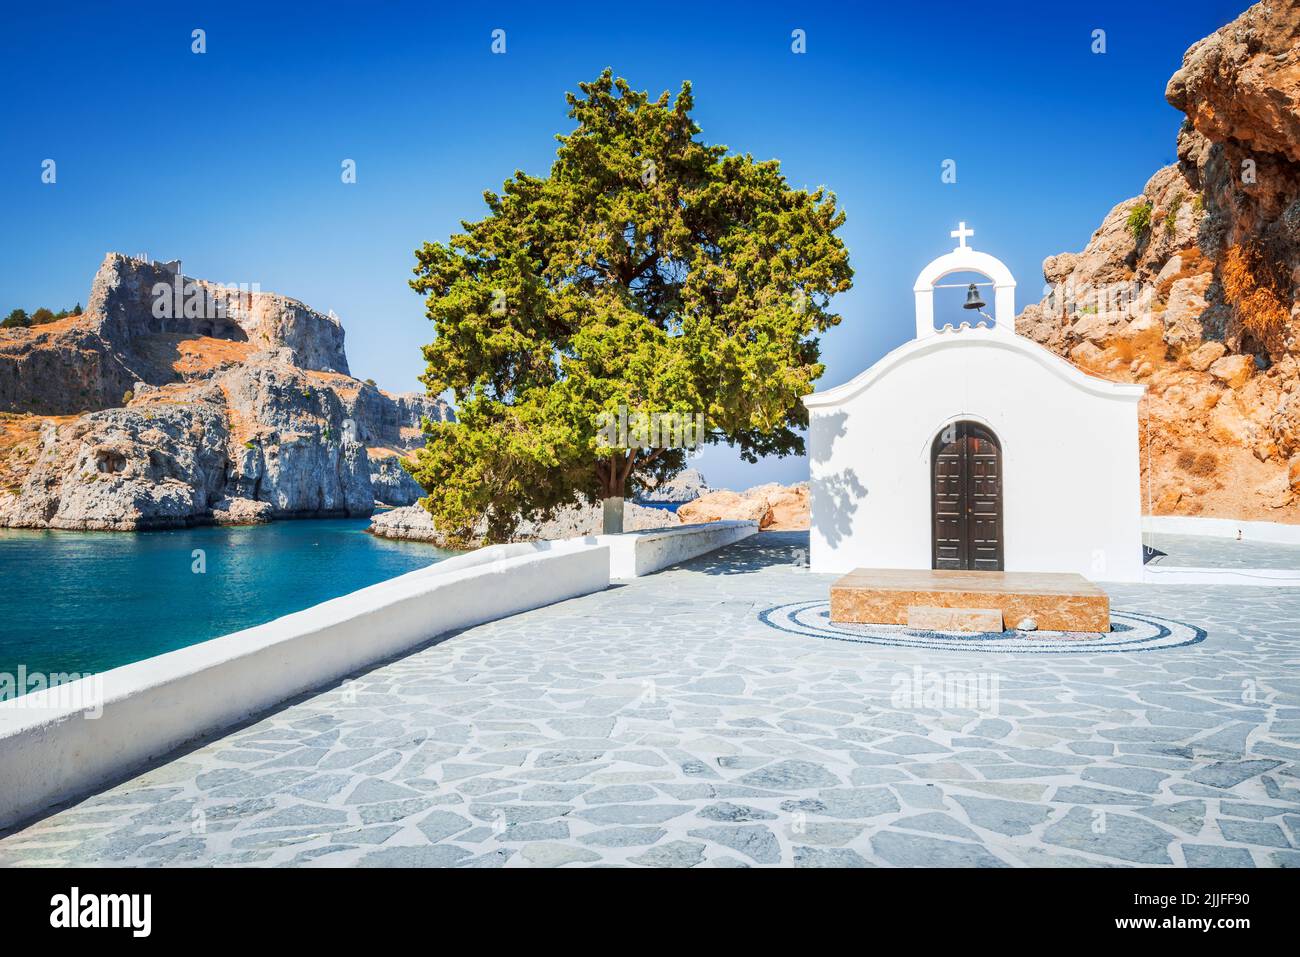 Rhodes, Greece. Saint Paul bay with white chapel. Aegean Sea landscape with ancient town of Lindos and Acropolis rocky ruins. Stock Photo